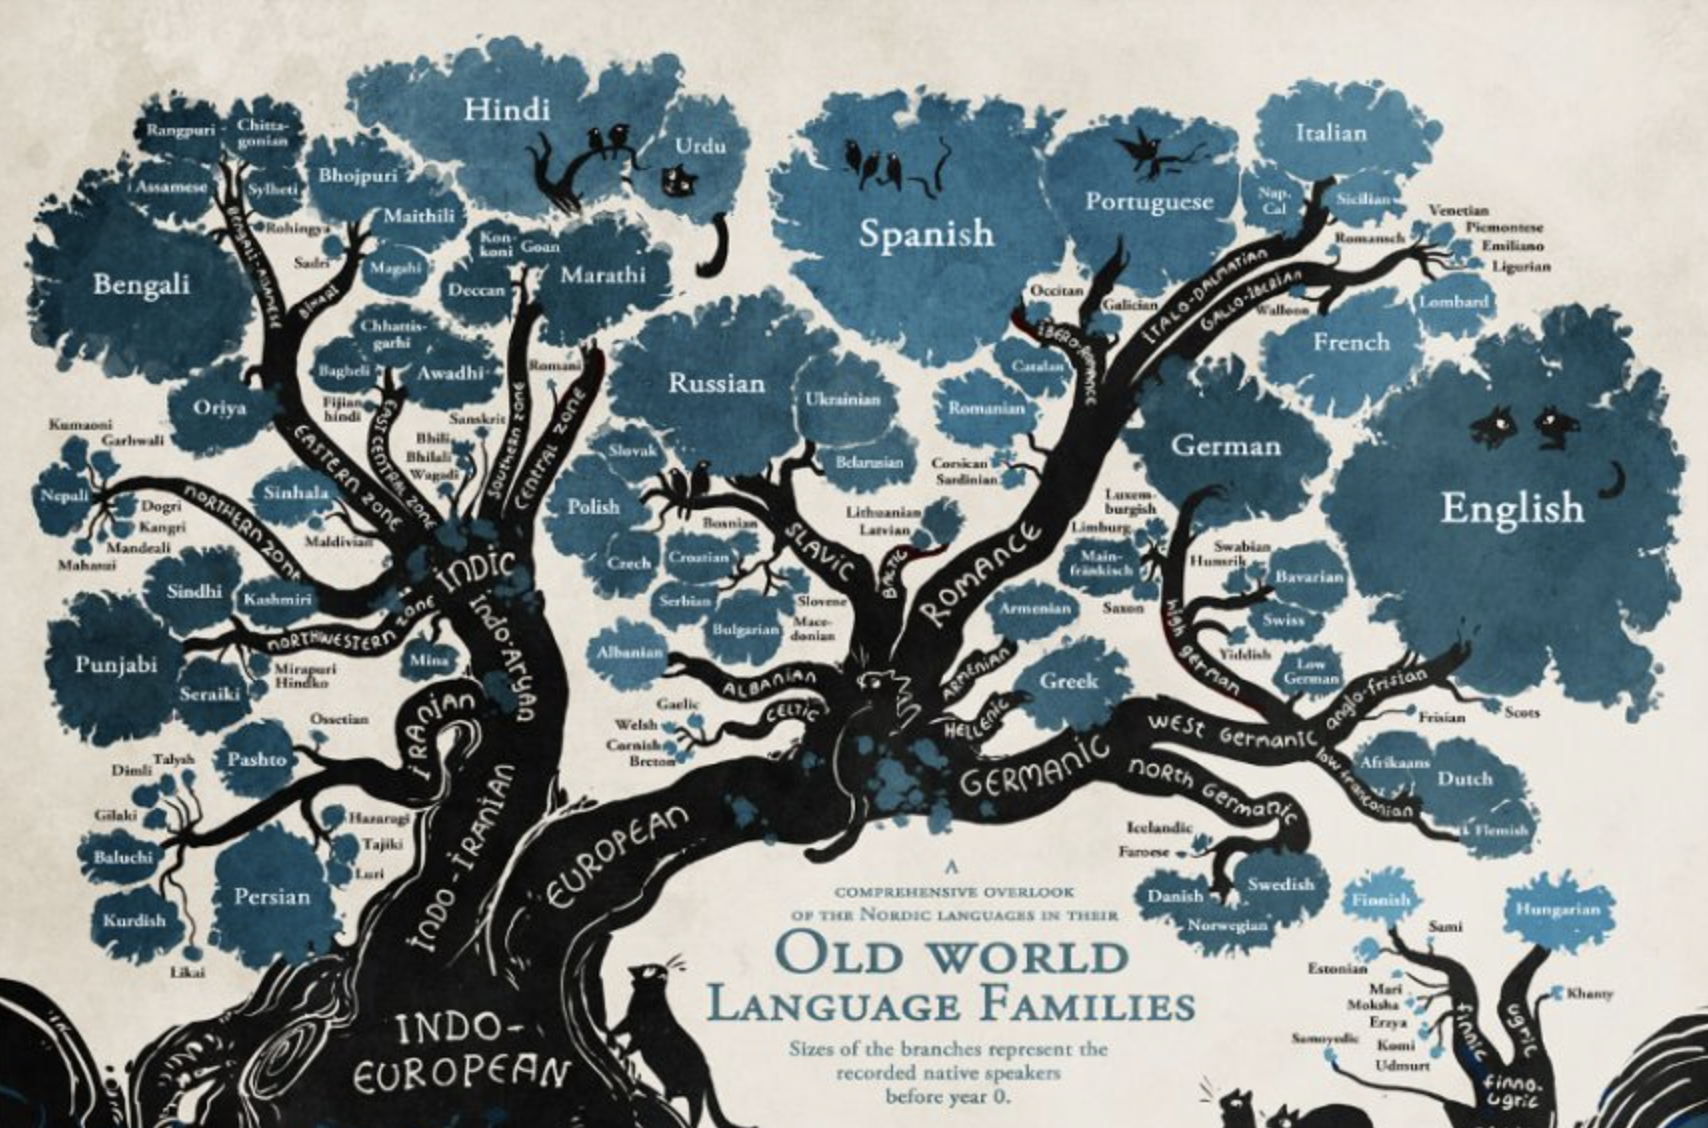 An artistic tree diagram where Indo-European languages branch out more and more into different languages